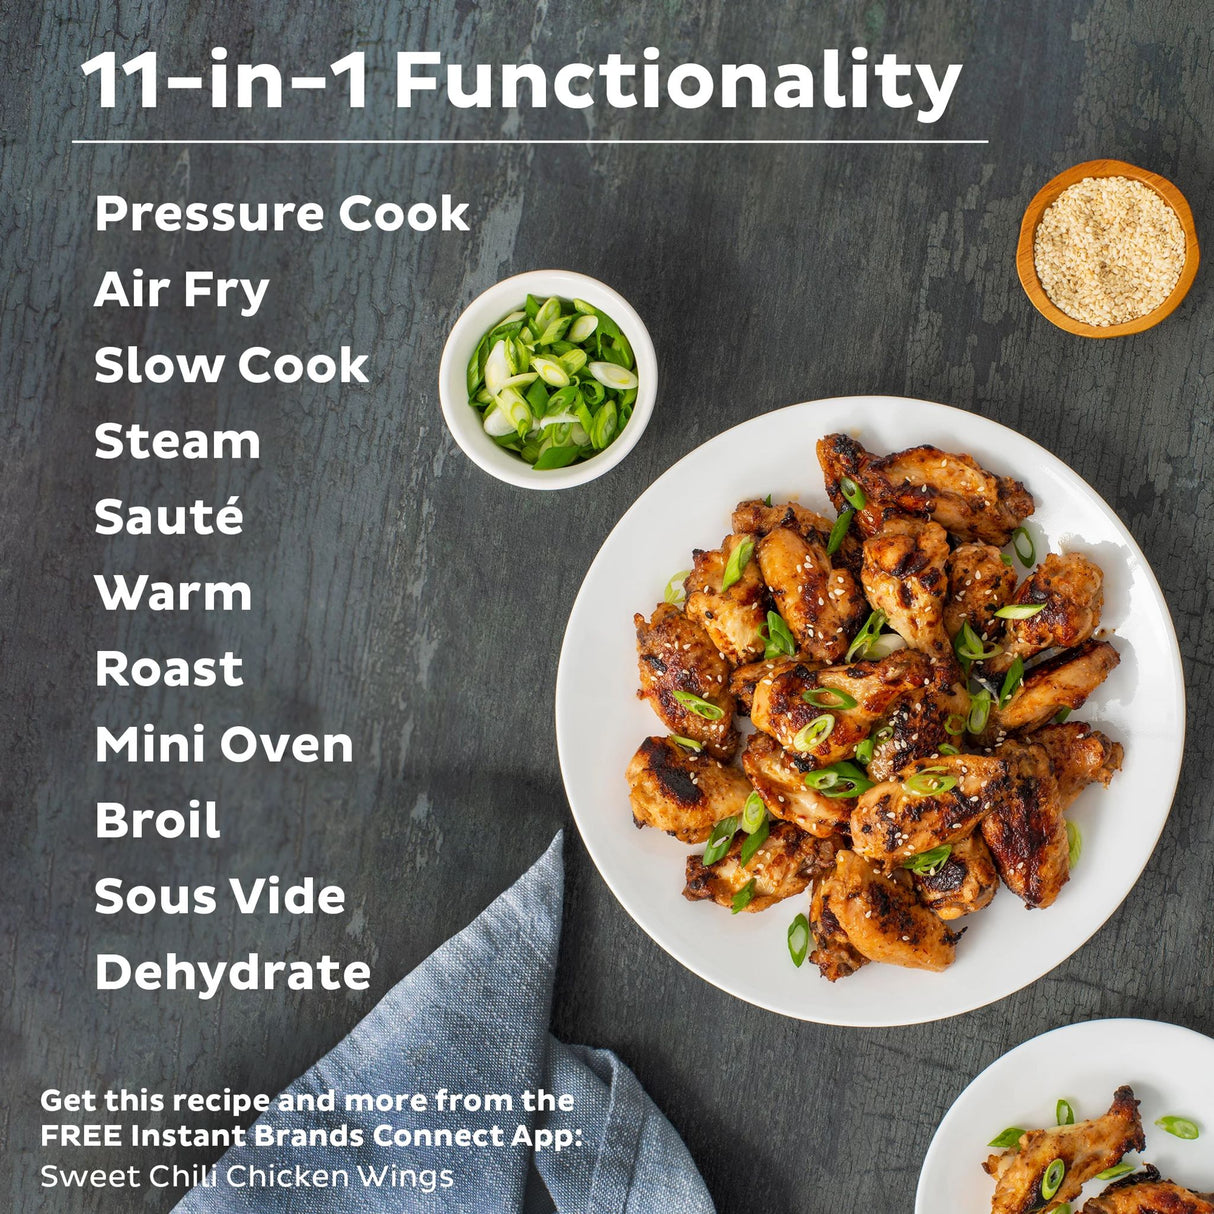  Instant Pot Duo Crisp and Air Fryer 8-quart Multi-Use Pressure Cooker with text 11 in 1 Functionality